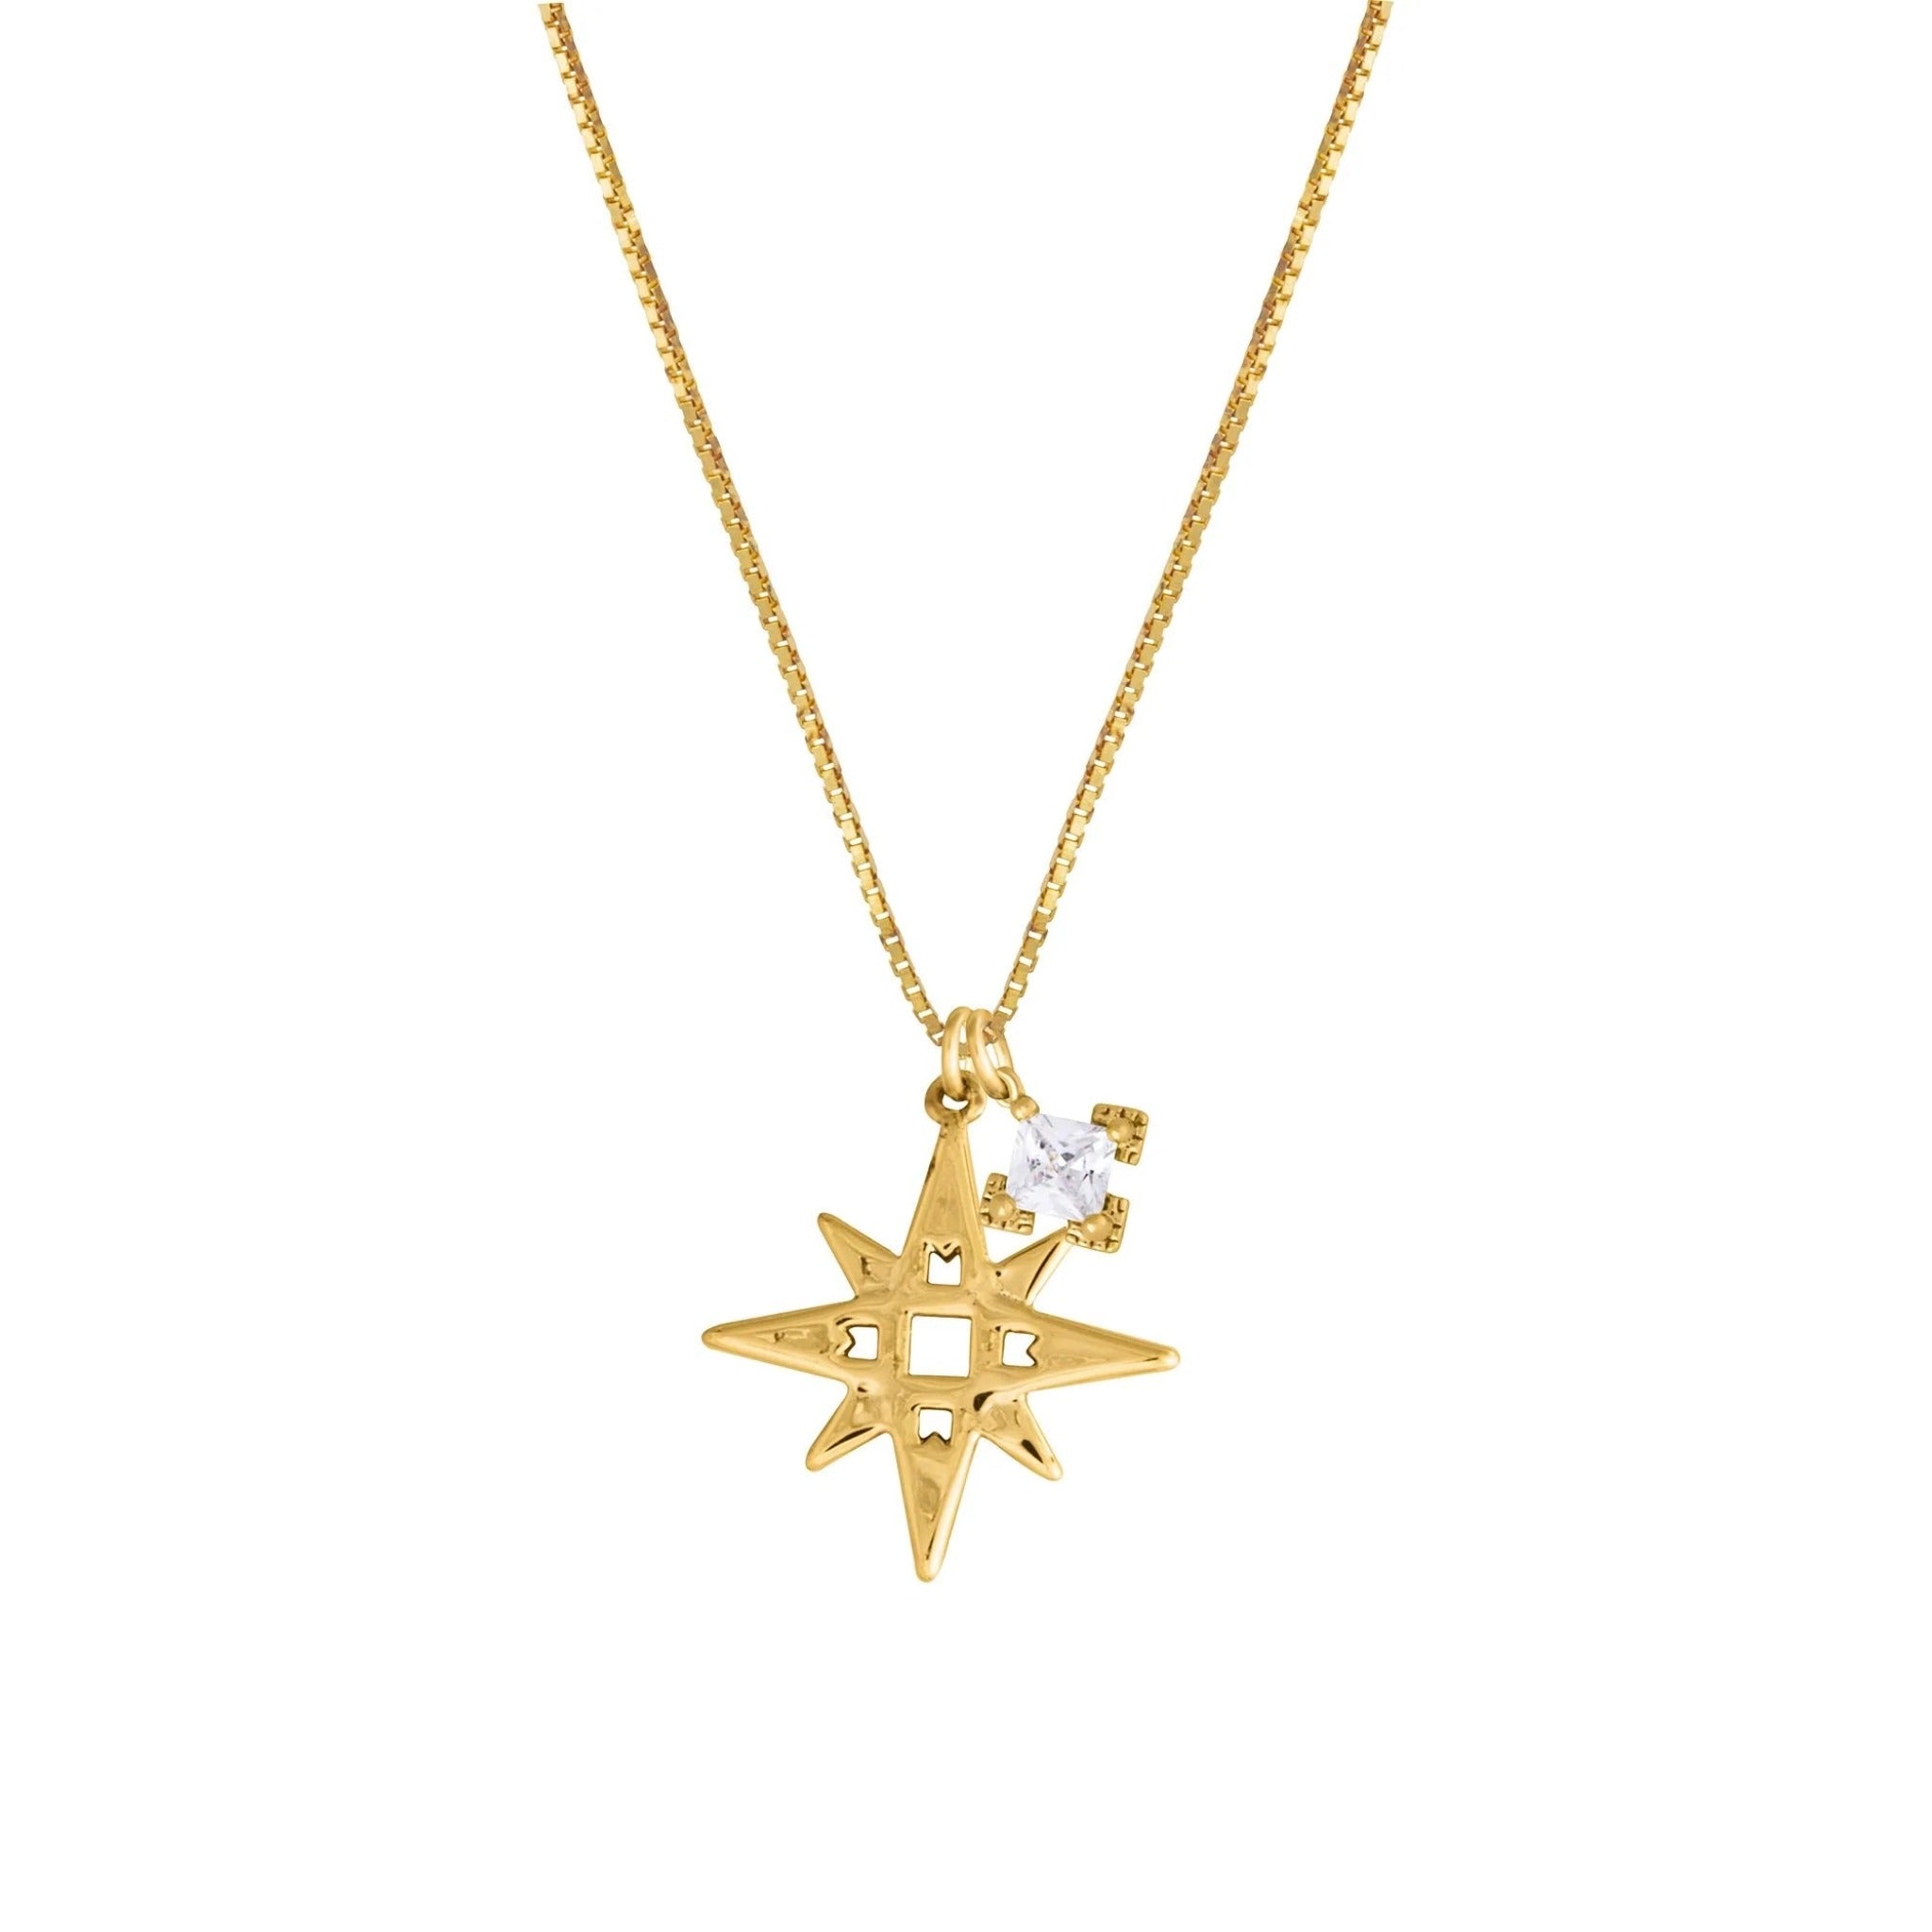 A Dusting of Jewels - Single Star Necklace